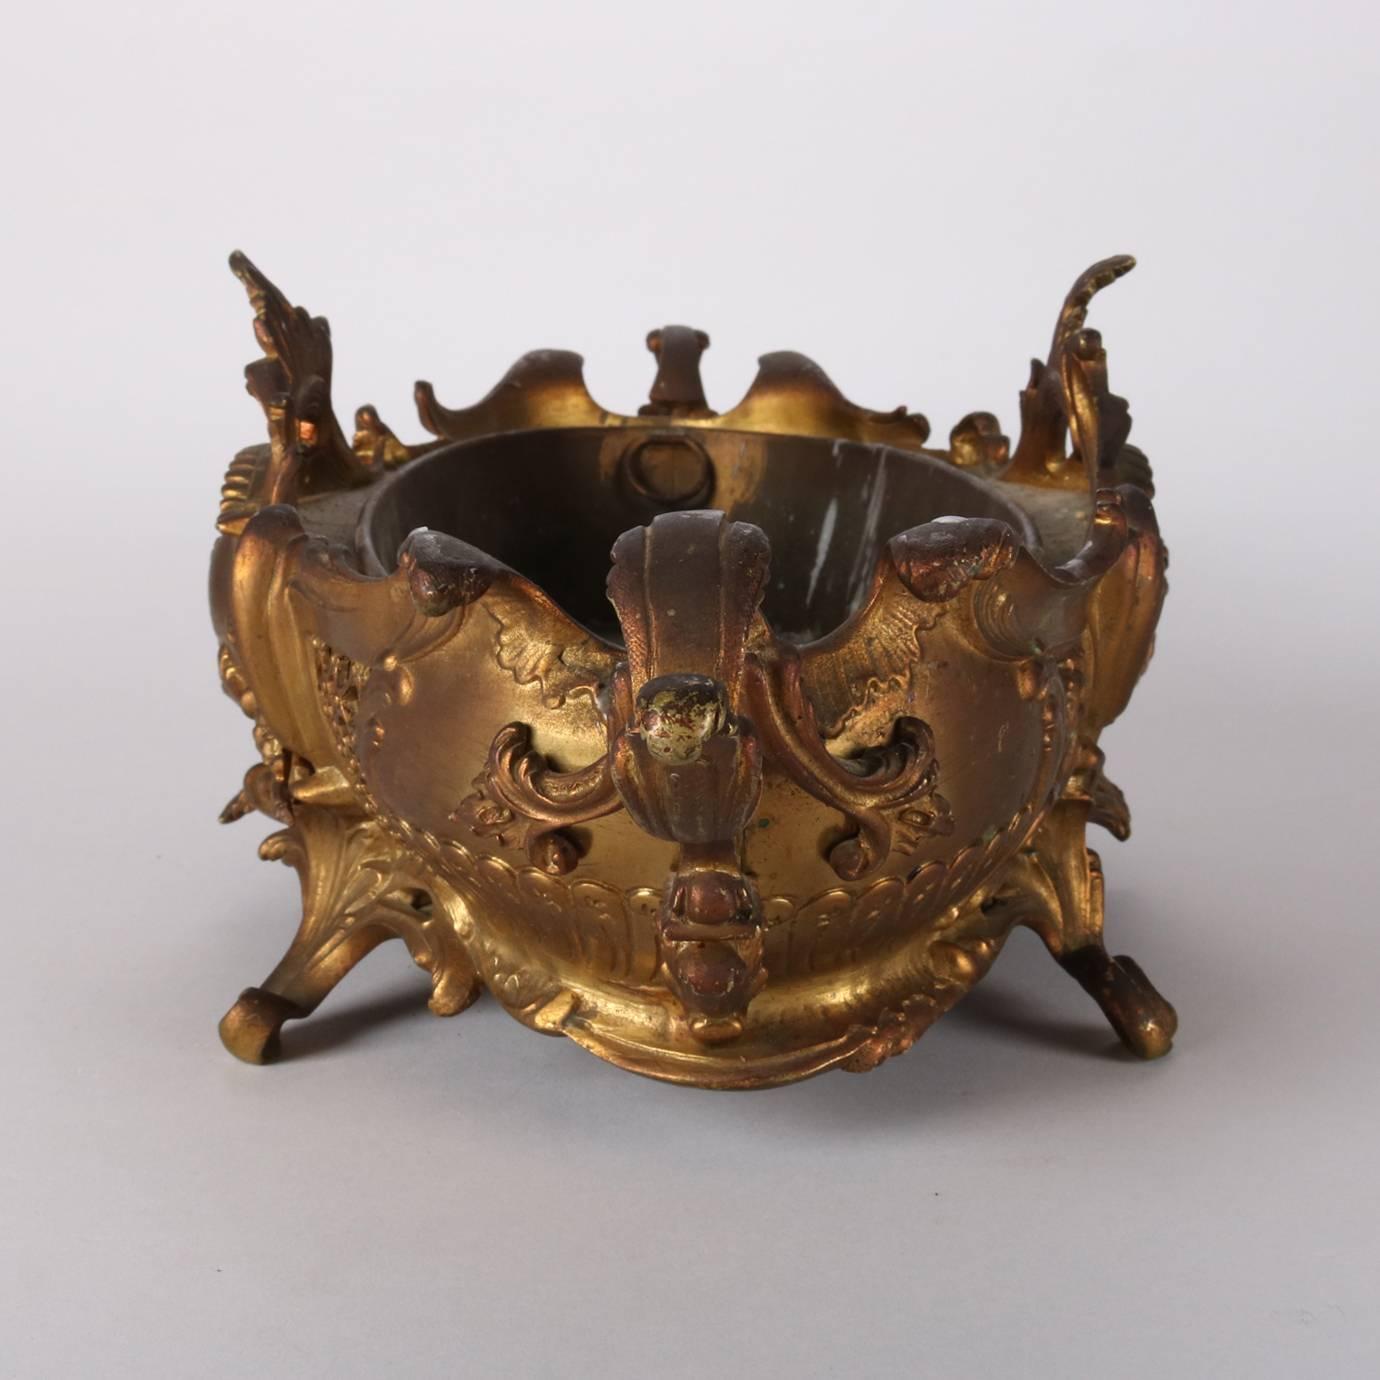 Cast Antique French Rococo Gilt Bronze Pierced Footed Console Bowl, 19th Century